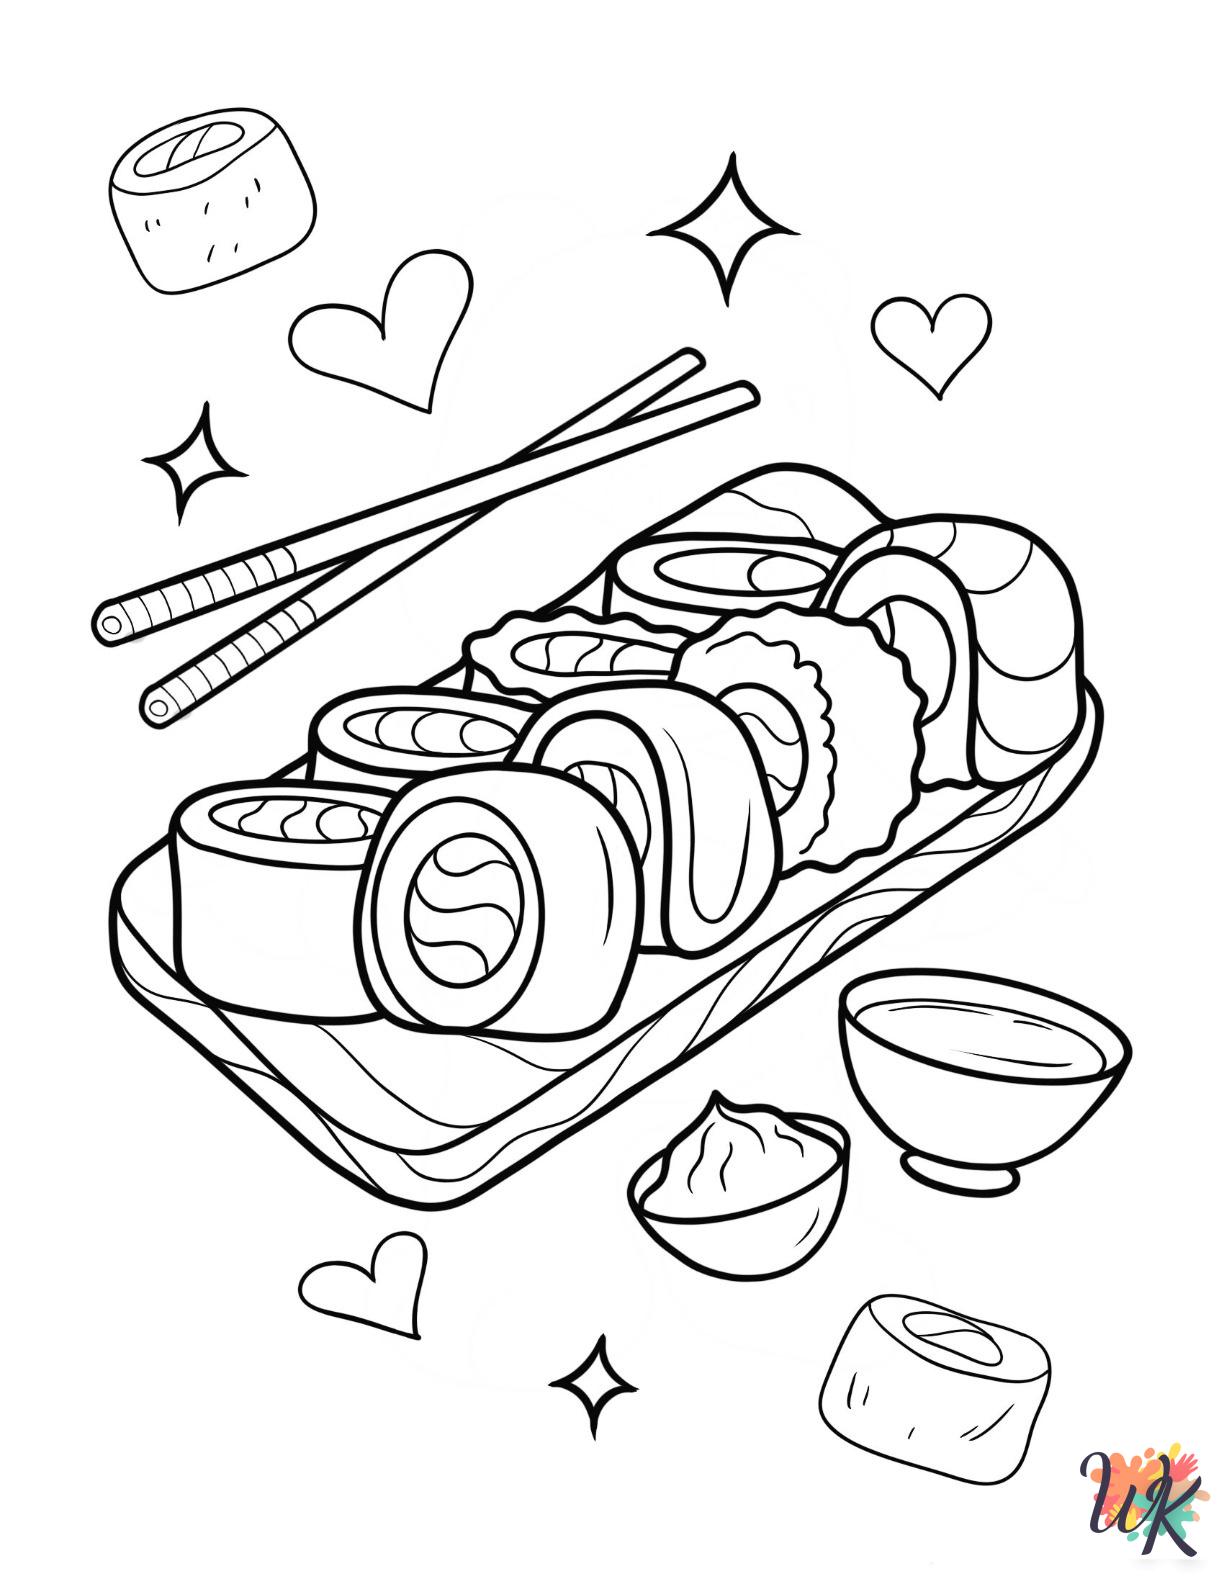 Sushi themed coloring pages